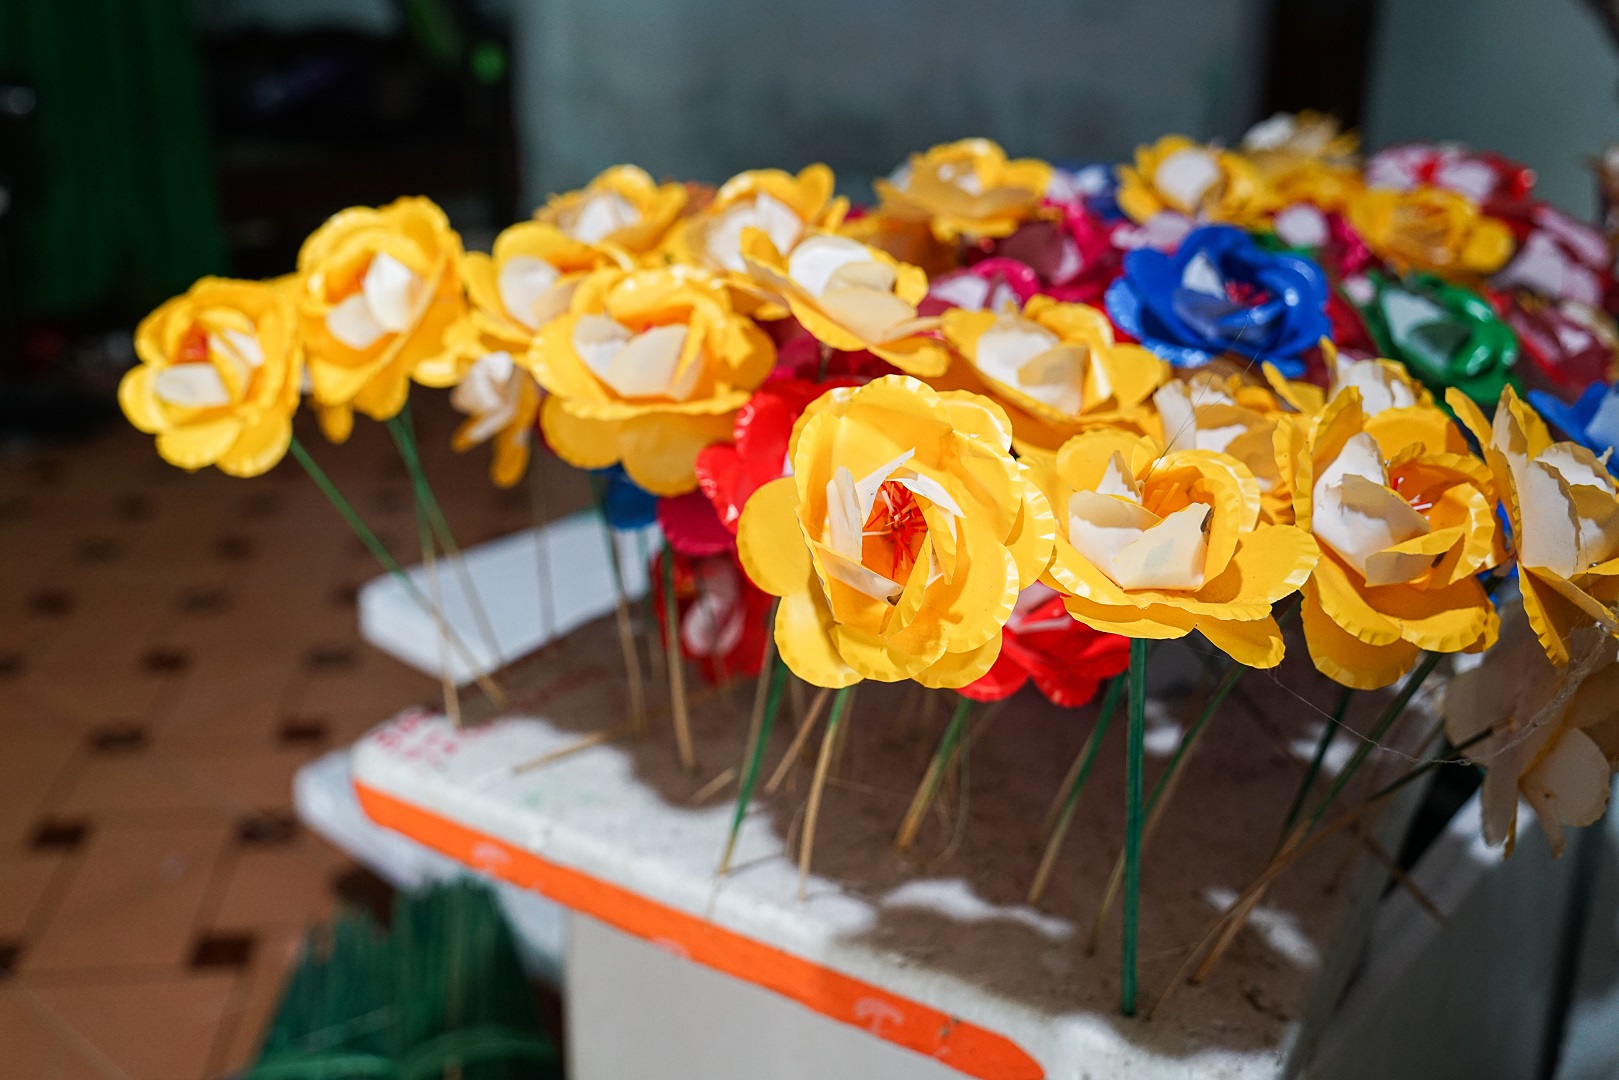 Paper flowers are diverse in colors, sizes, types and are used for various purposes. They are all colorful and eye-catching. Photo: Nguyen Trung Au / Tuoi Tre News